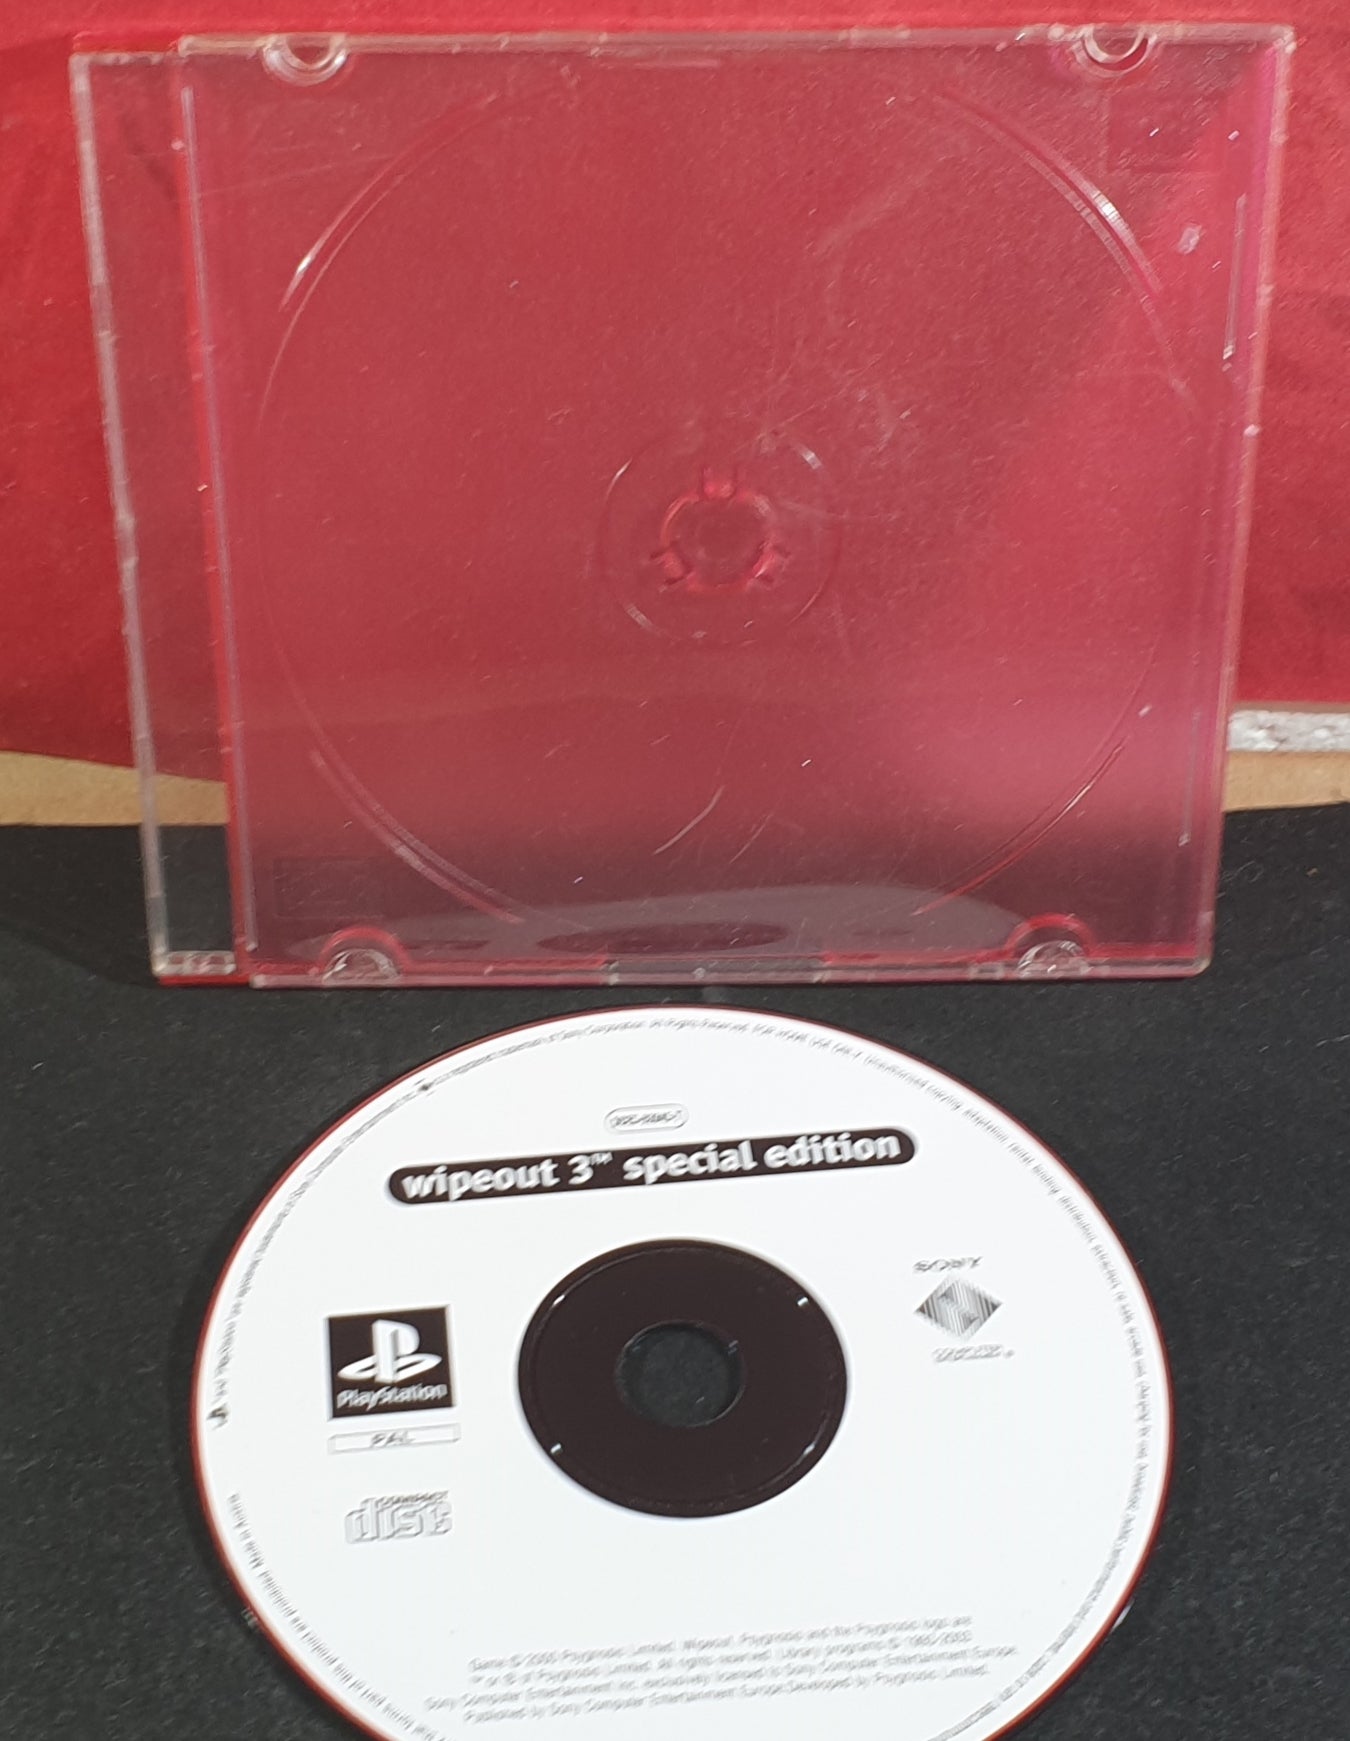 Wipeout 3 Special Edition Disc Only Sony Playstation 1 (PS1) Game